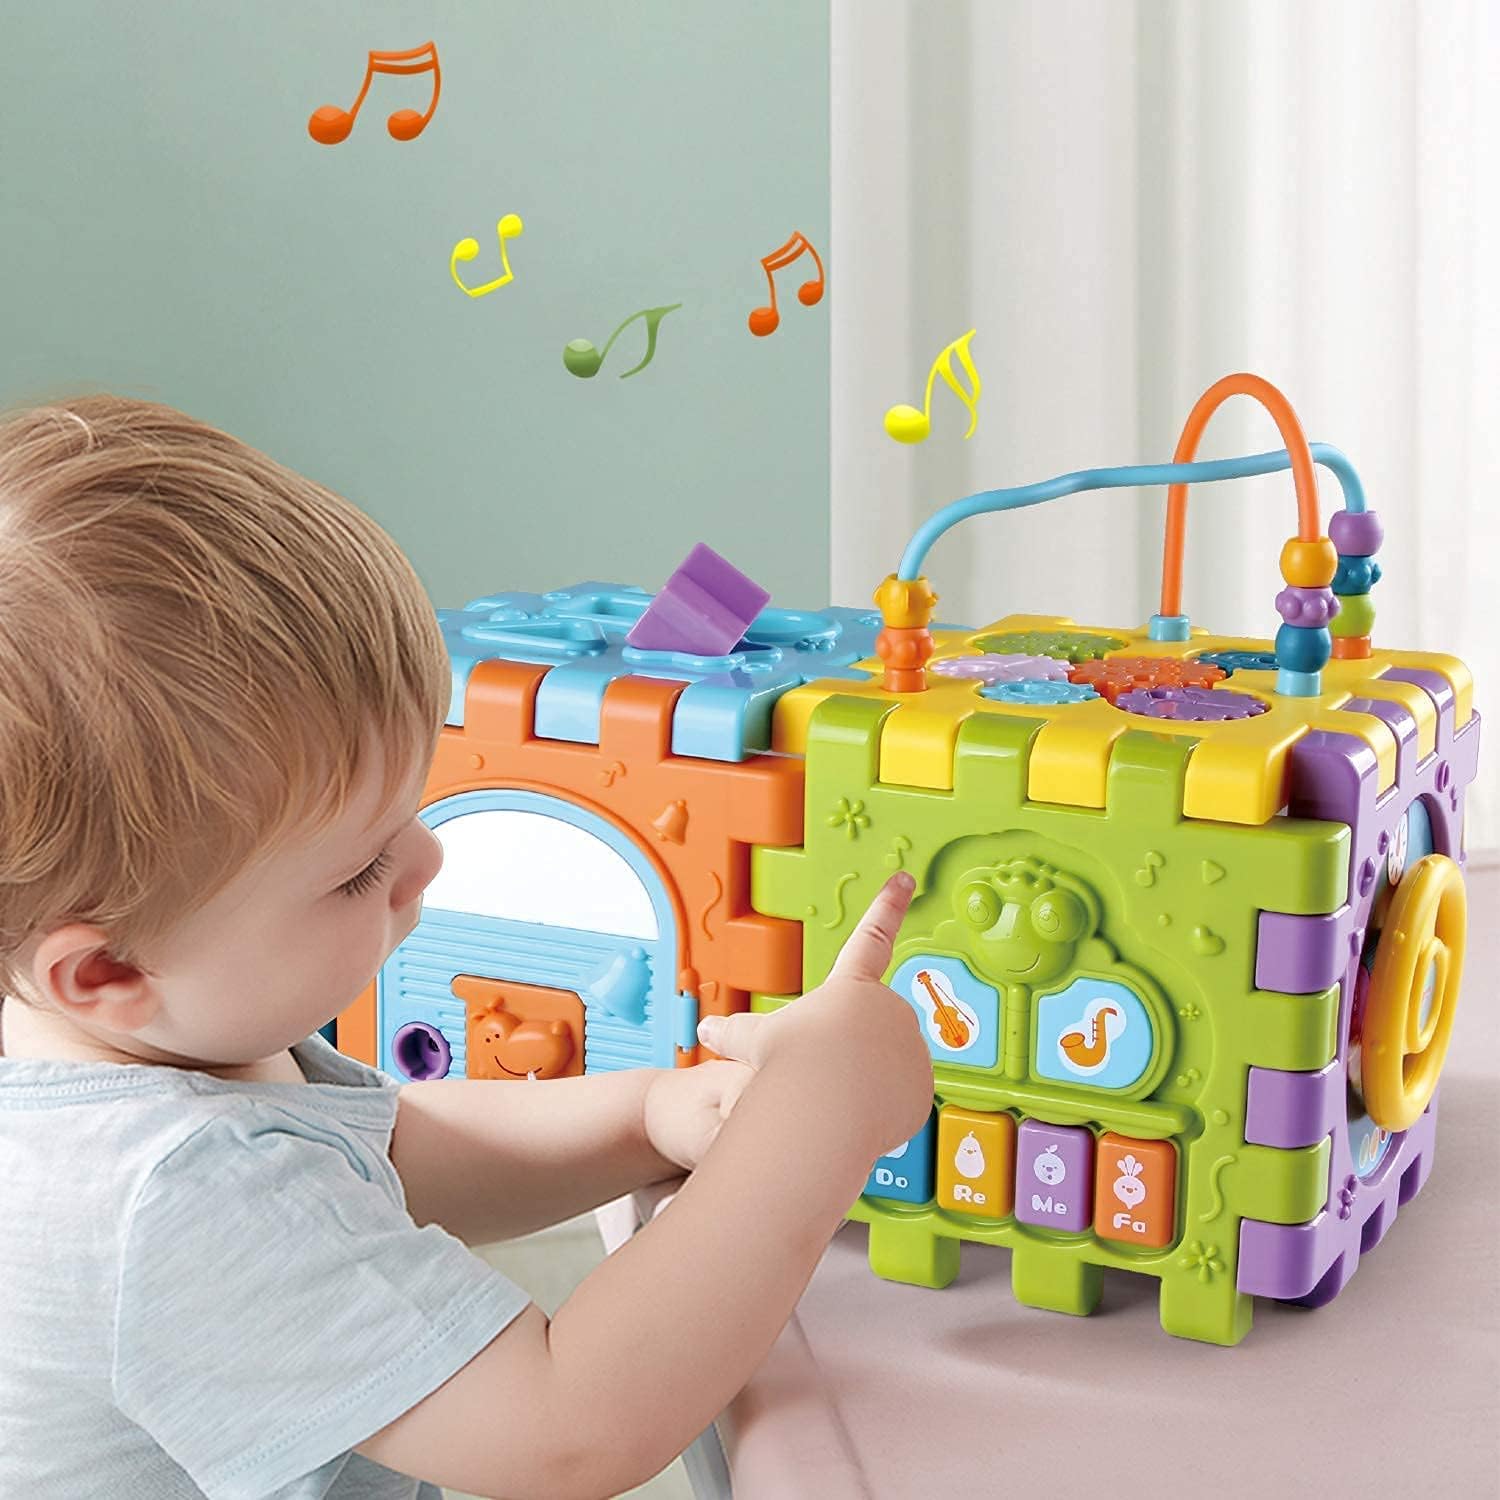 Activity Cube Baby Toys 6 to12 Months,Early Educational Music and Light Baby Toys for 6 12 18 Months,1 Year Old Baby Toys Play Center, Boys Girls Birthday Gifts for 1 2 Years Old